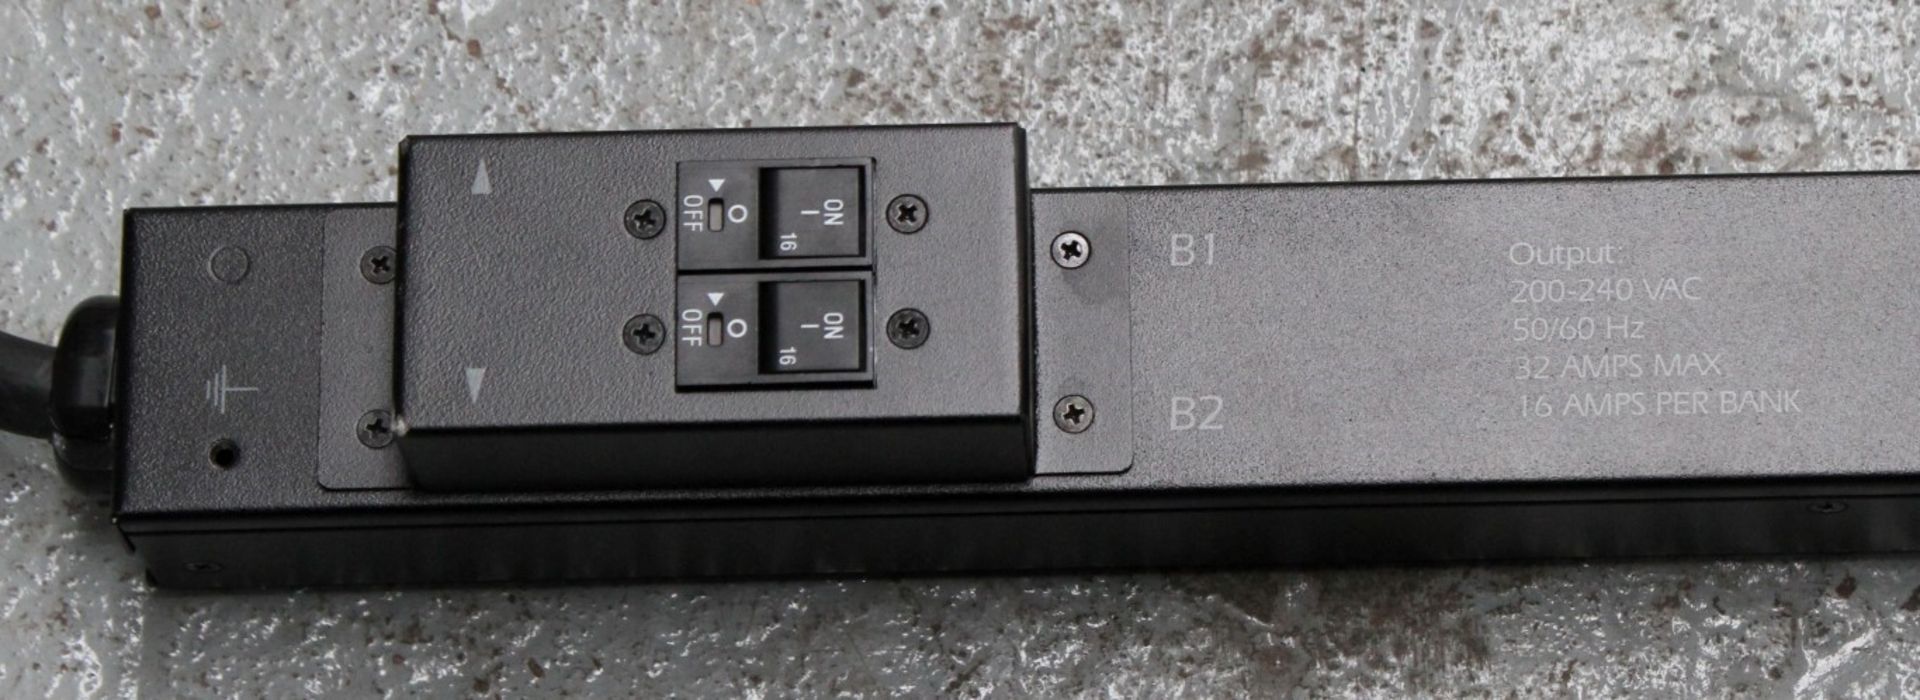 1 x APC Basic Rack Power Distribution Unit PDU - Model AP7553 - 230V 32A - CL106 - Removed From - Image 3 of 5